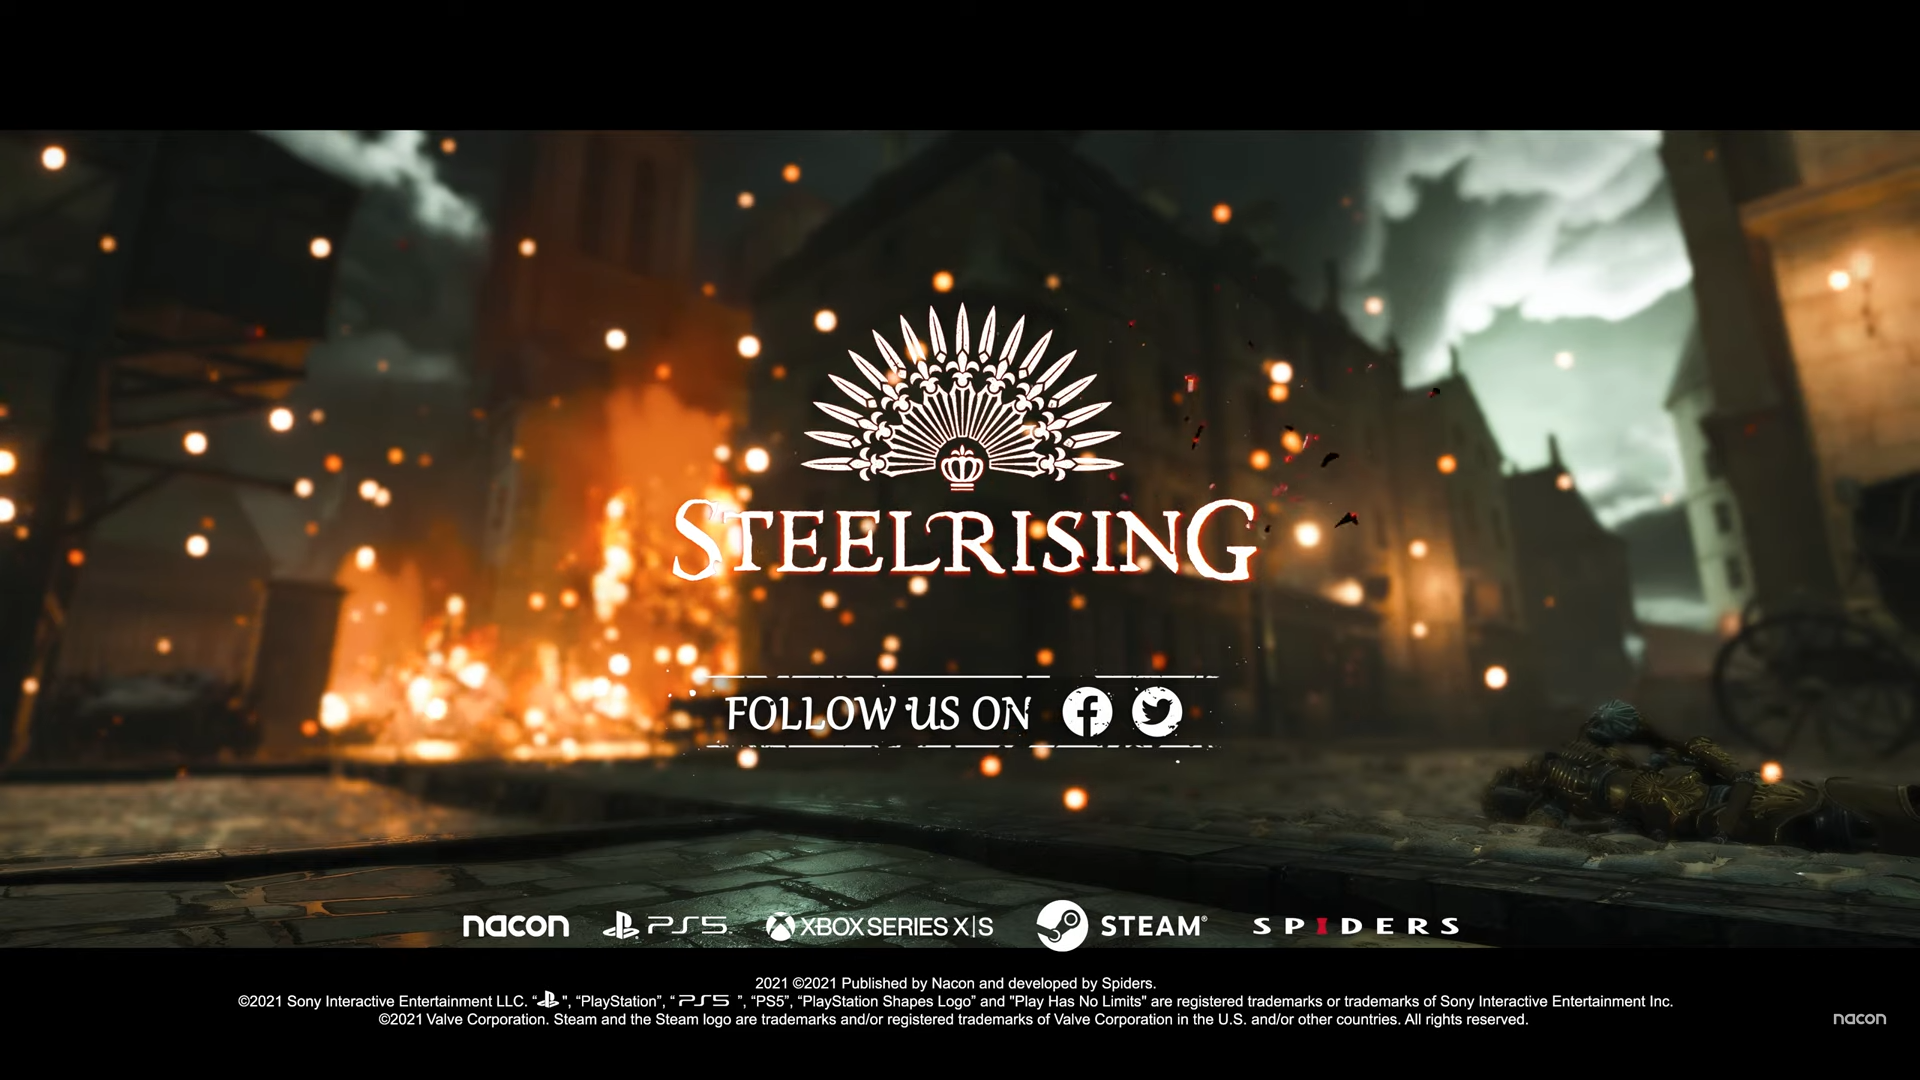 Steelrising for iphone download